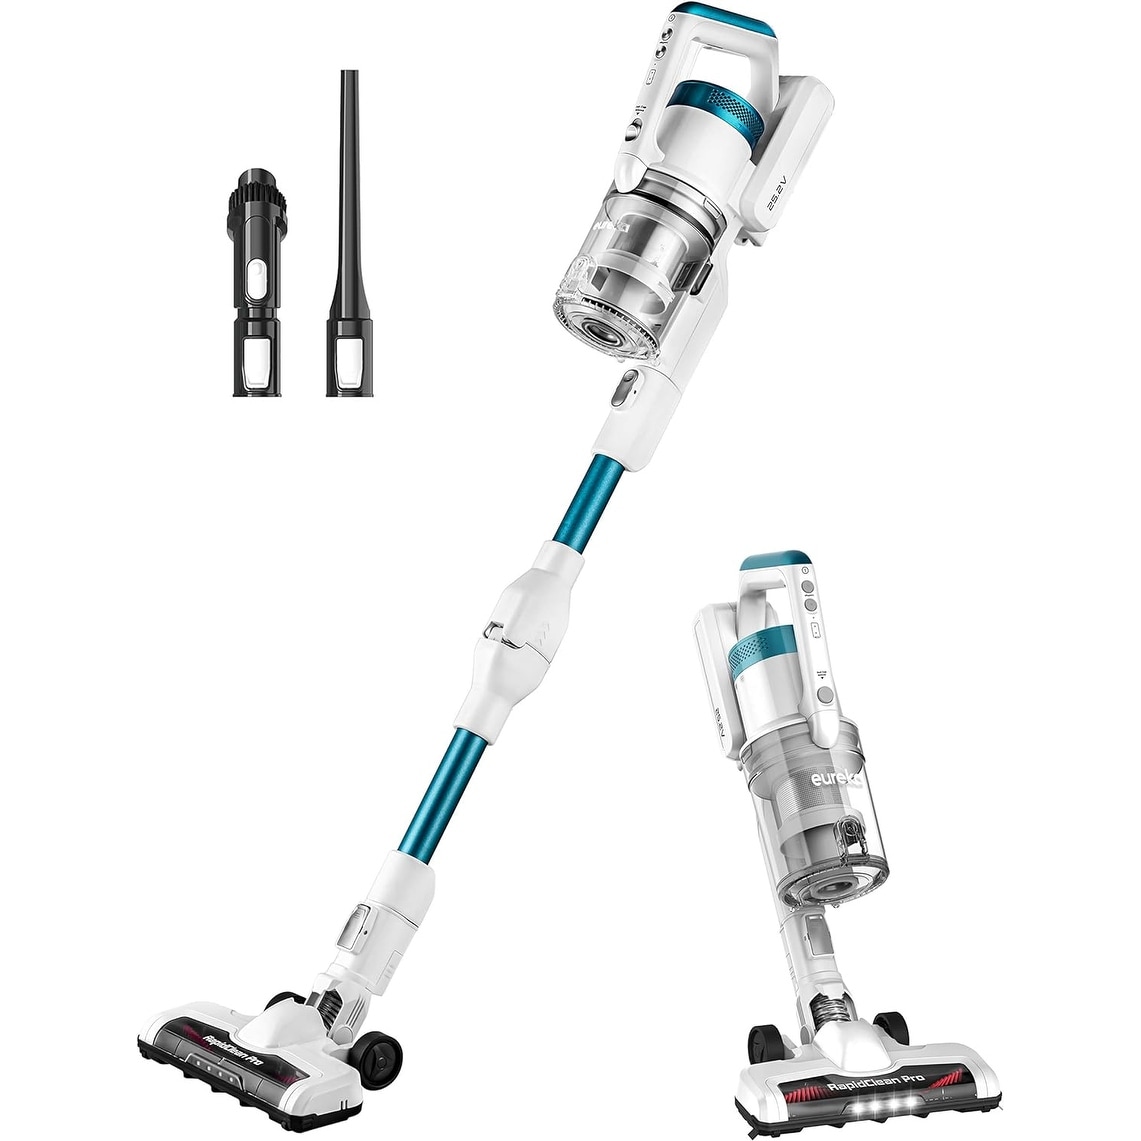 Cordless Stick Vacuum Cleaner Convenient for Hard Floors, Rechargeable  Handheld Vacuum Cleaner Portable - Bed Bath & Beyond - 39912067